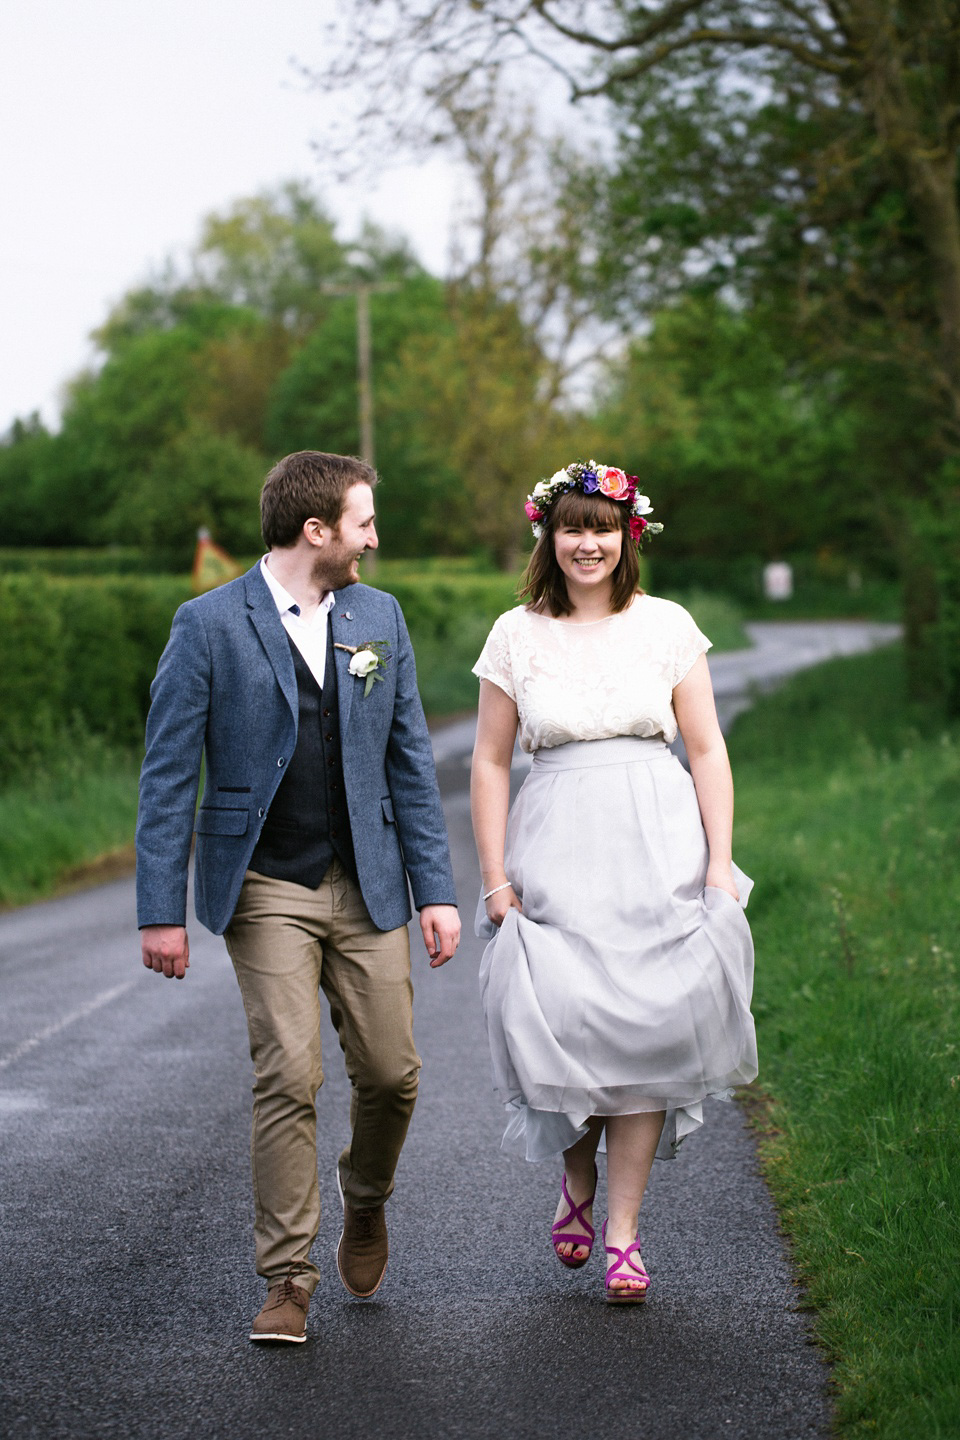 The bride wears a top and skirt for her charming orchard wedding. Photography by Cat Lane.